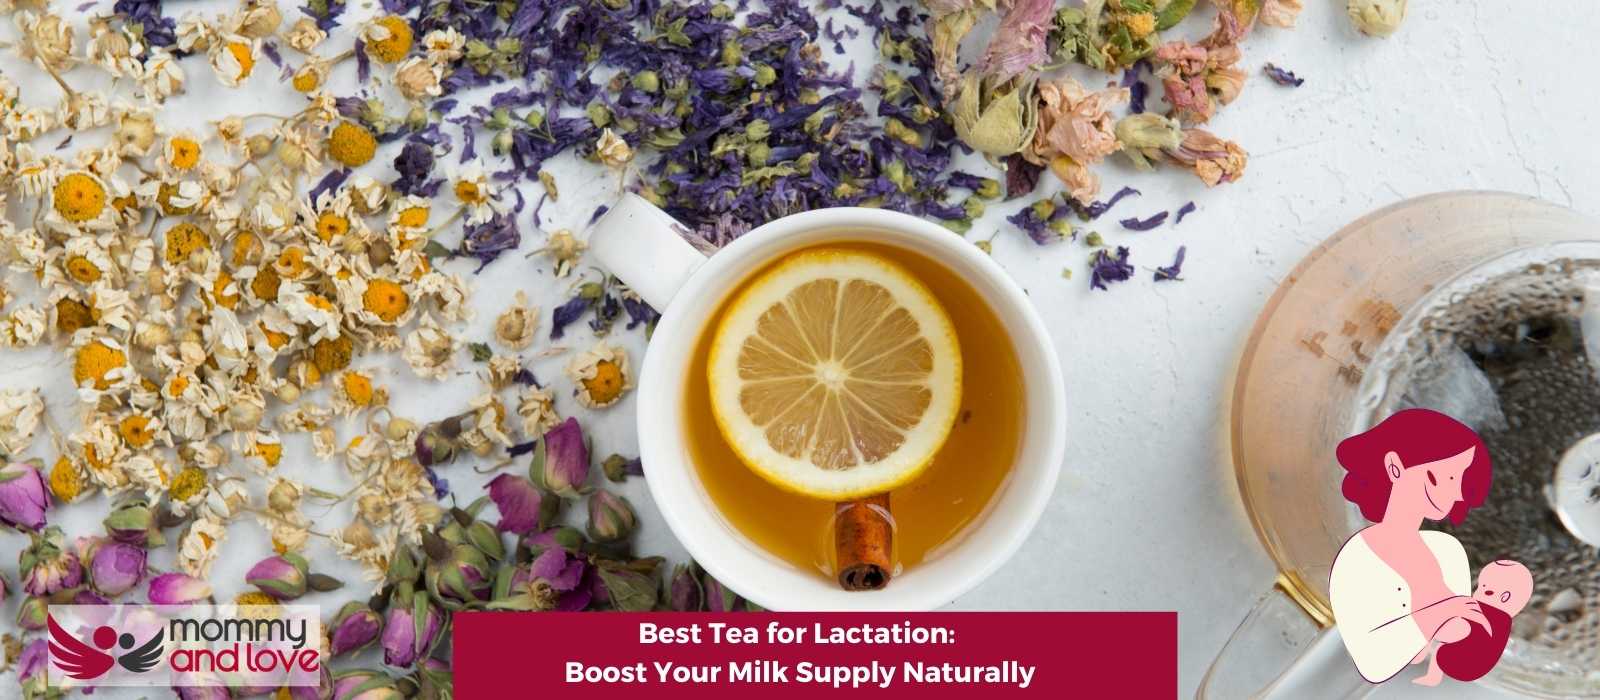 Best Tea for Lactation Boost Your Milk Supply Naturally